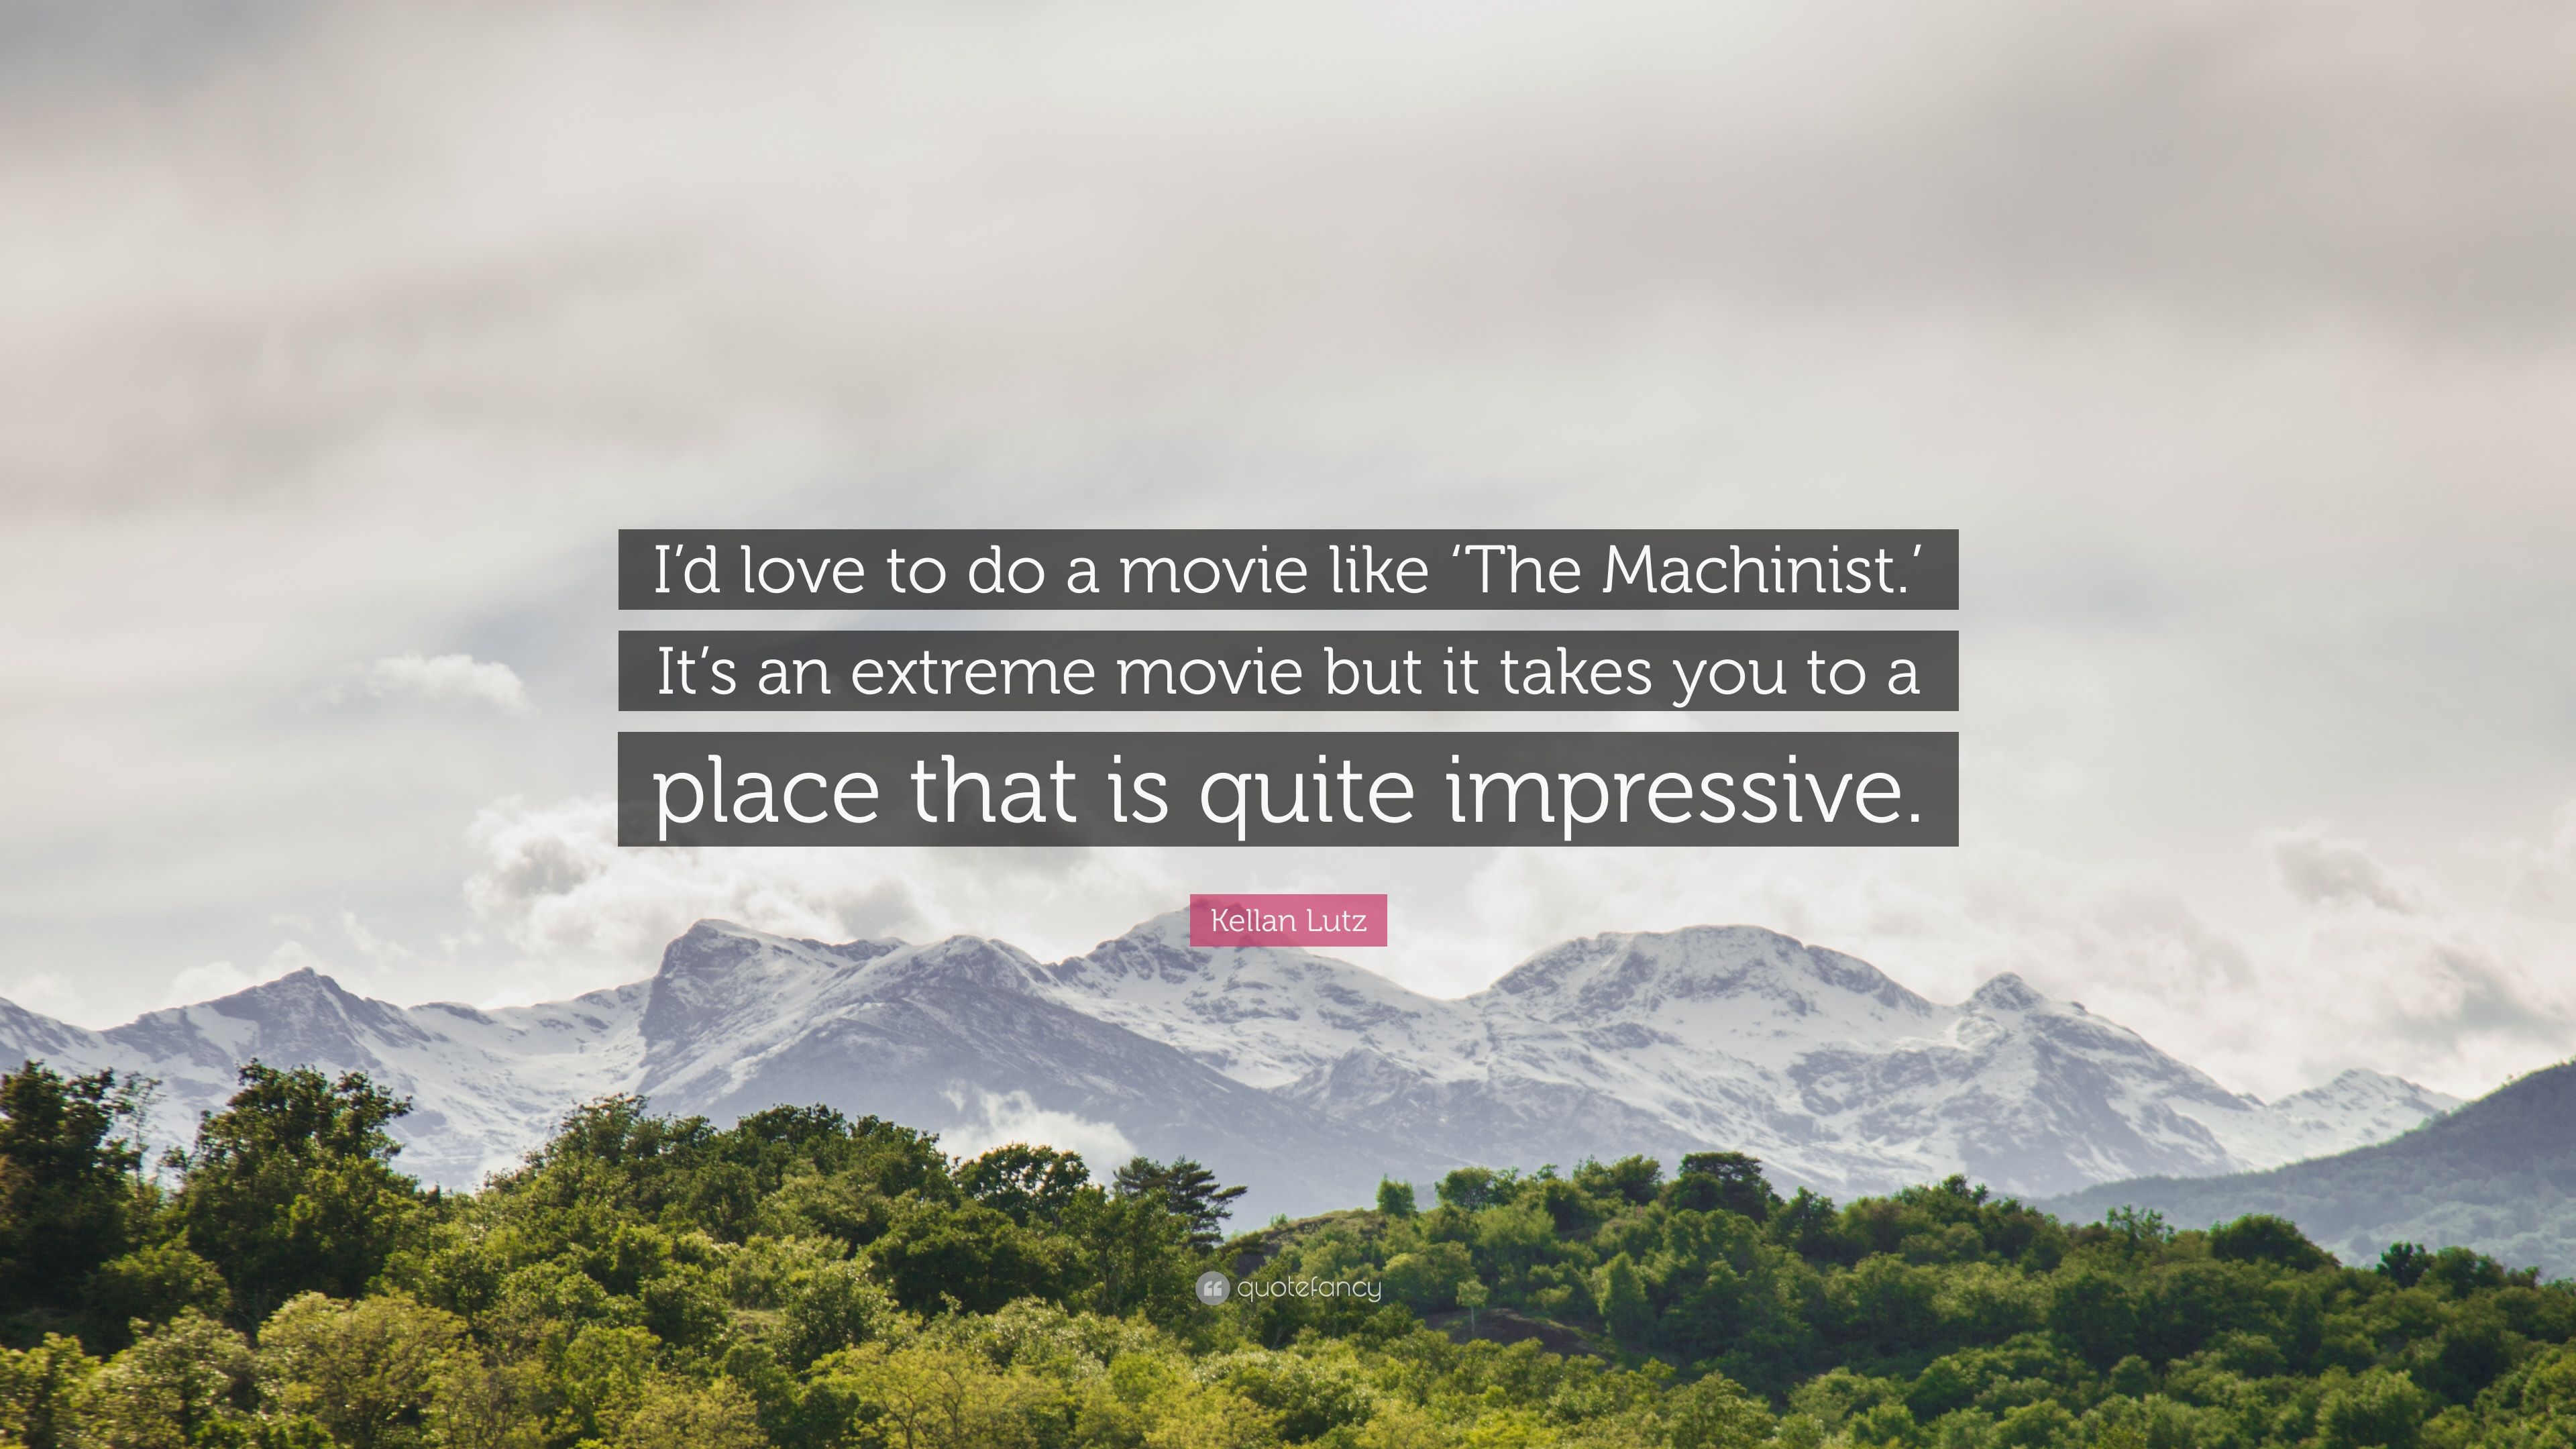 Kellan Lutz Quote: “I'd love to do a movie like 'The Machinist